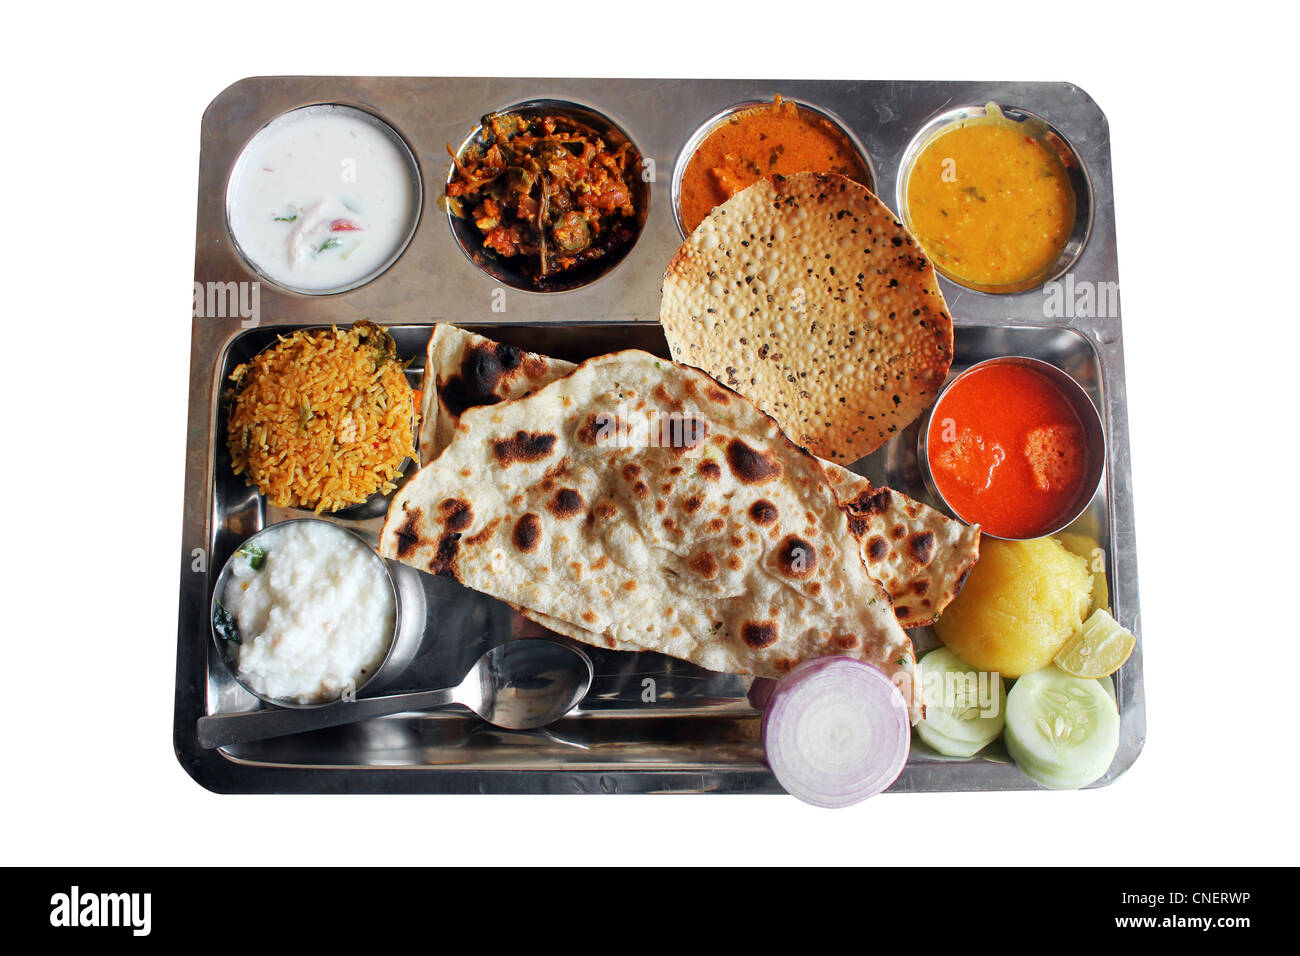 Traditional north indian plate meals or lunch with roti, biryani, curry and soup. Stock Photo